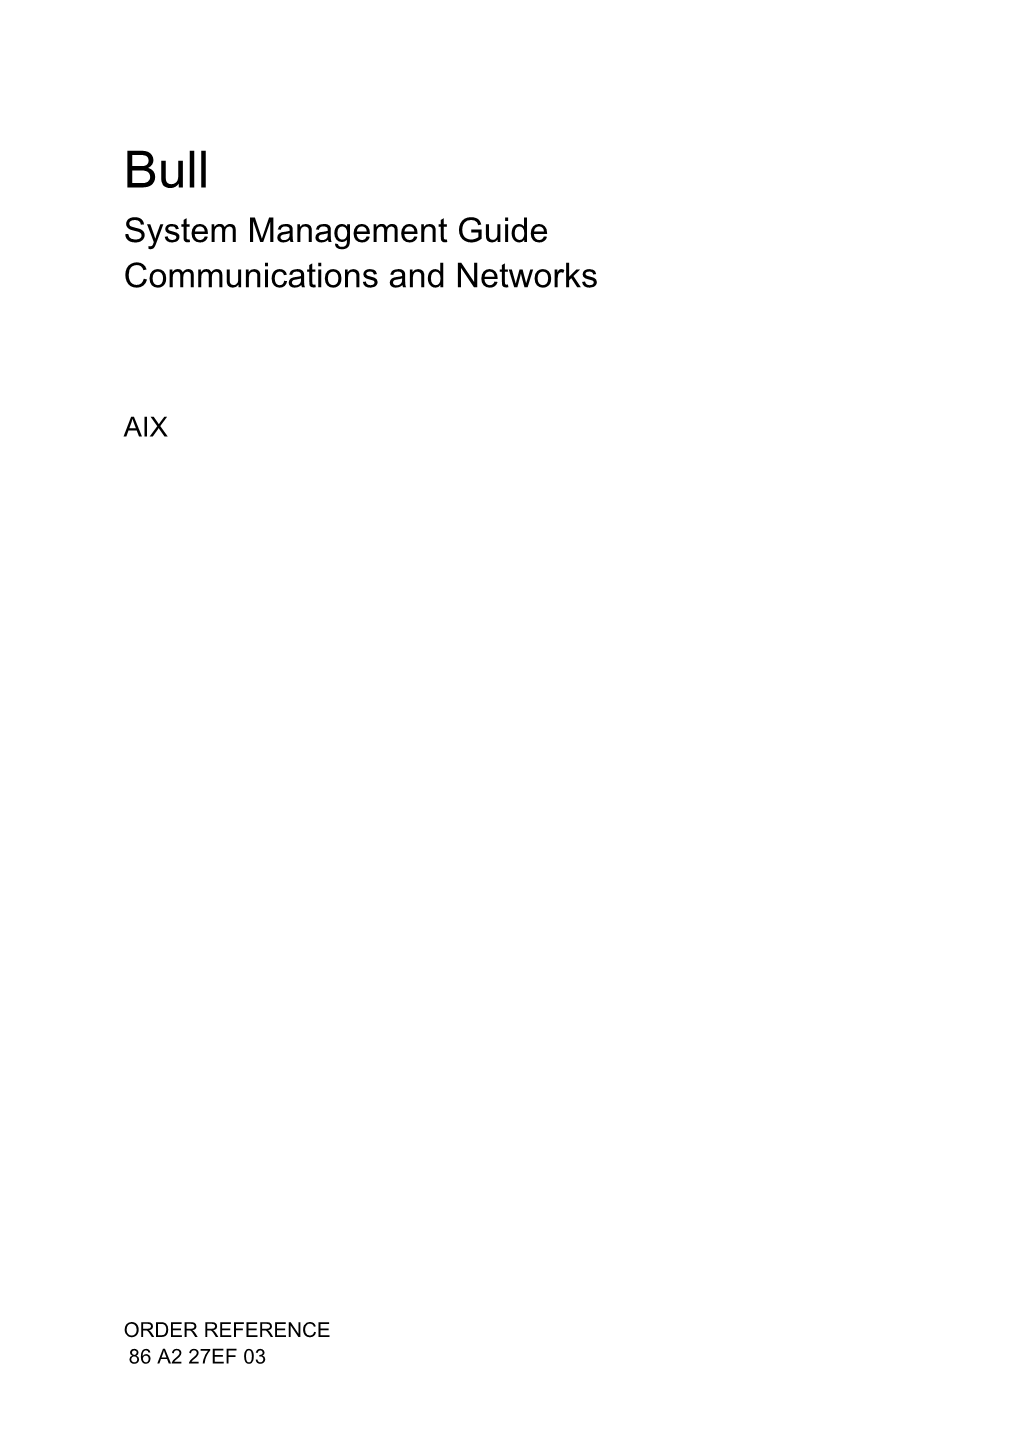 System Management Guide Communications and Networks